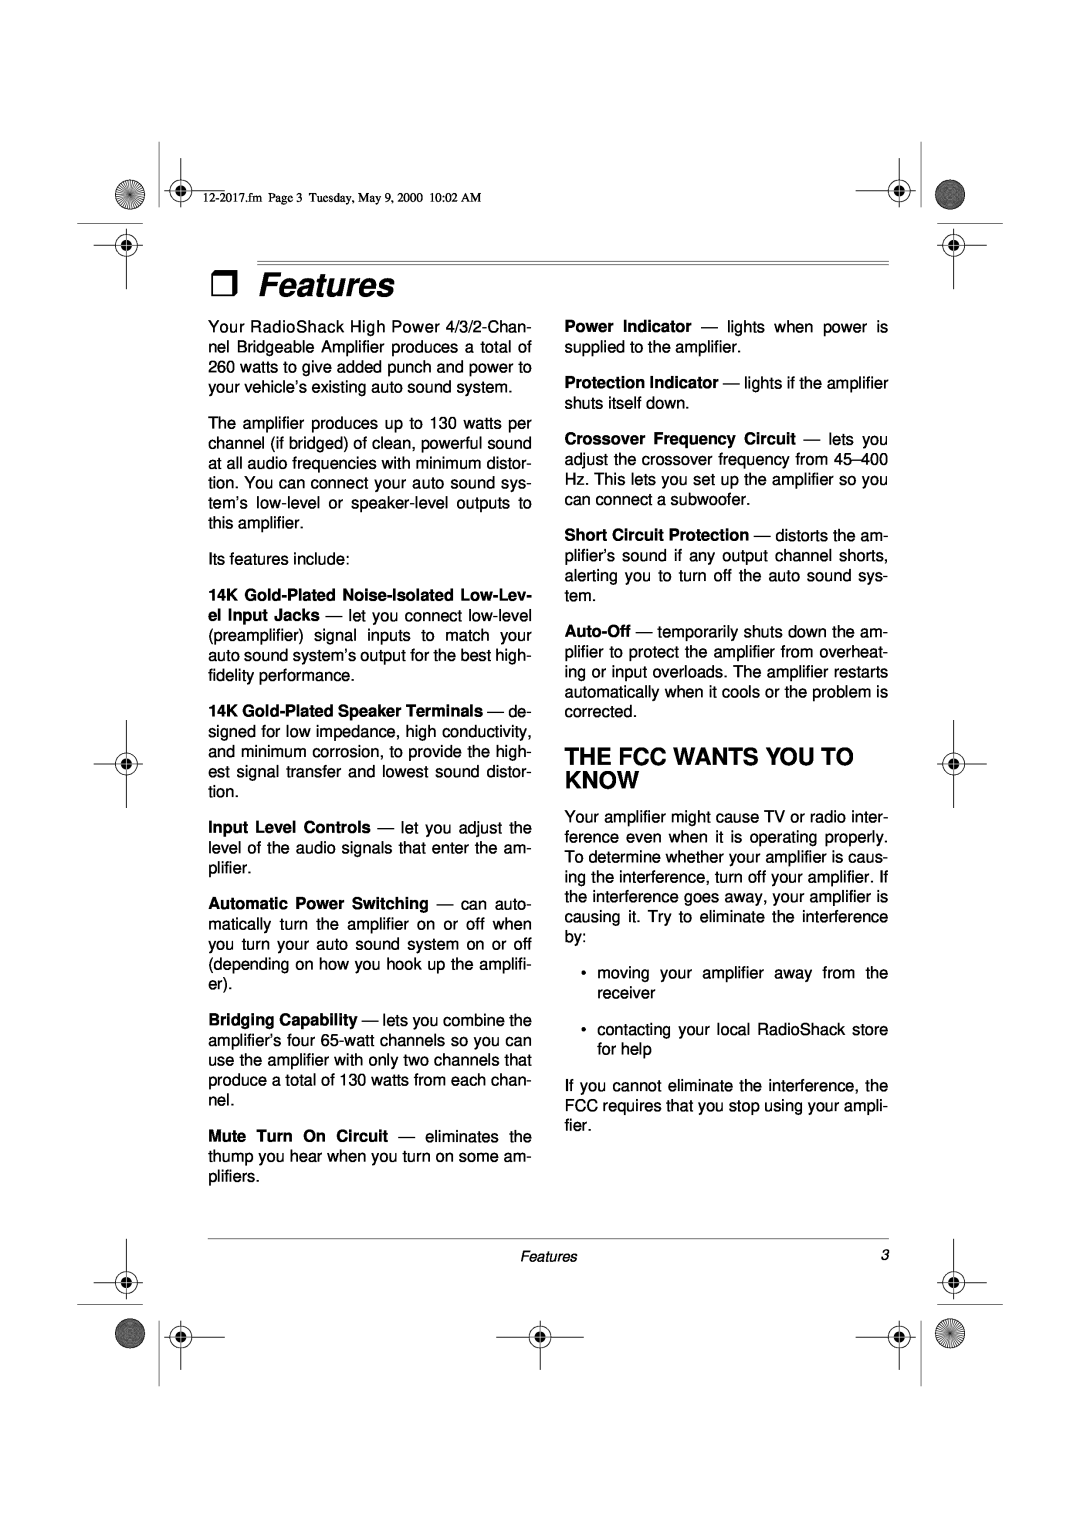 Radio Shack XL-260 owner manual ˆFeatures, The Fcc Wants You To Know 